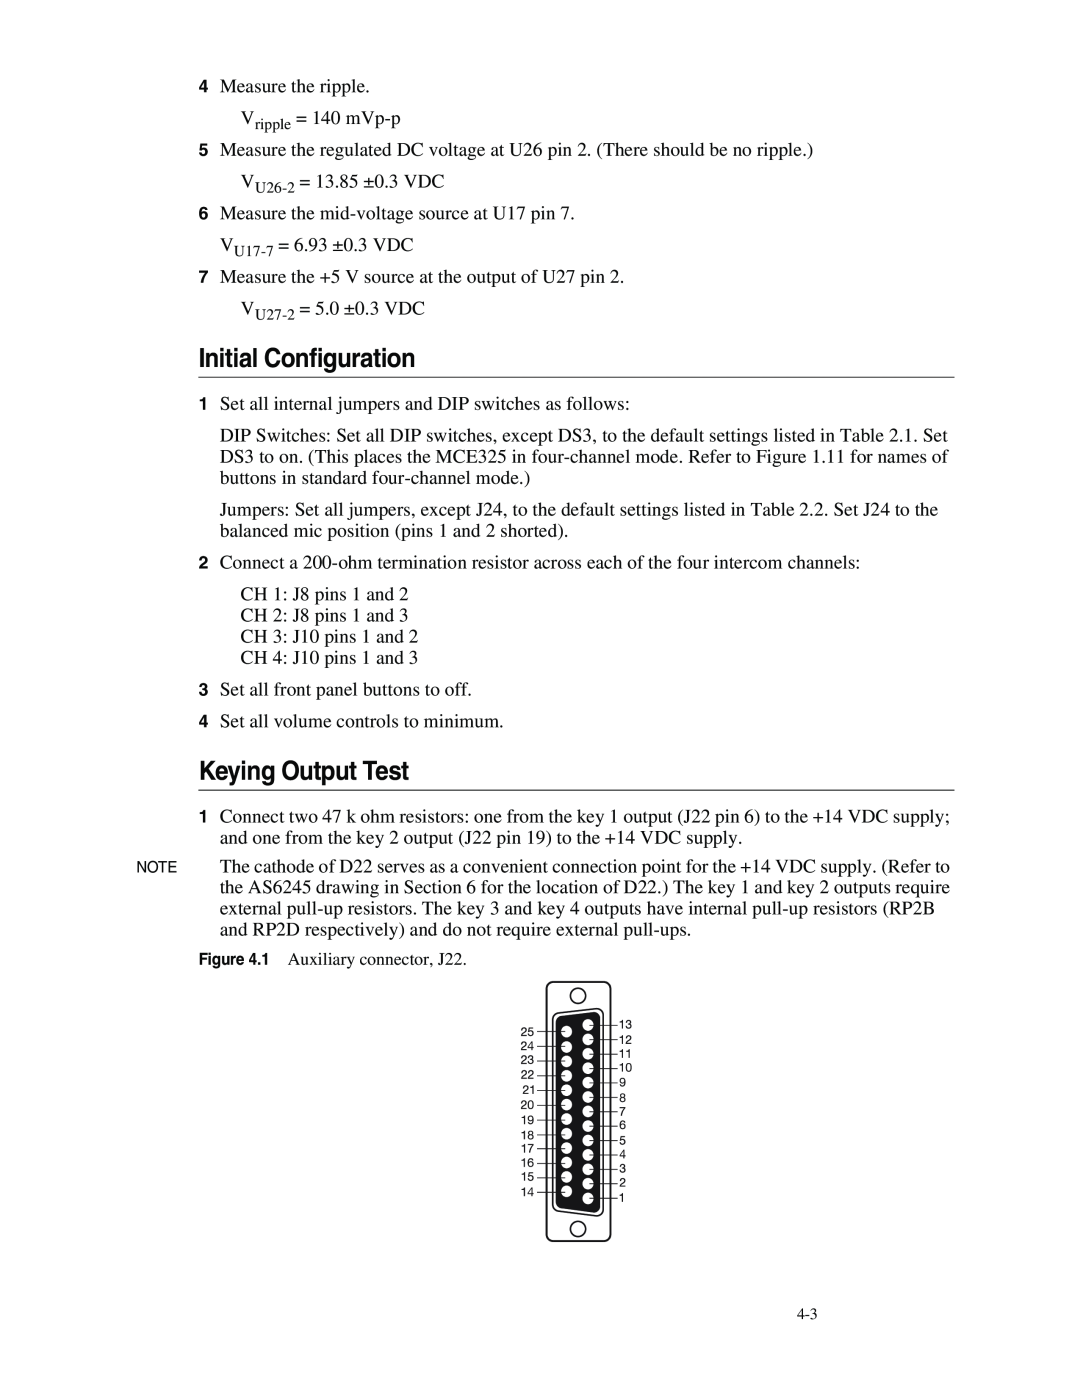 Telex MCE325 manual Initial Configuration, Keying Output Test 